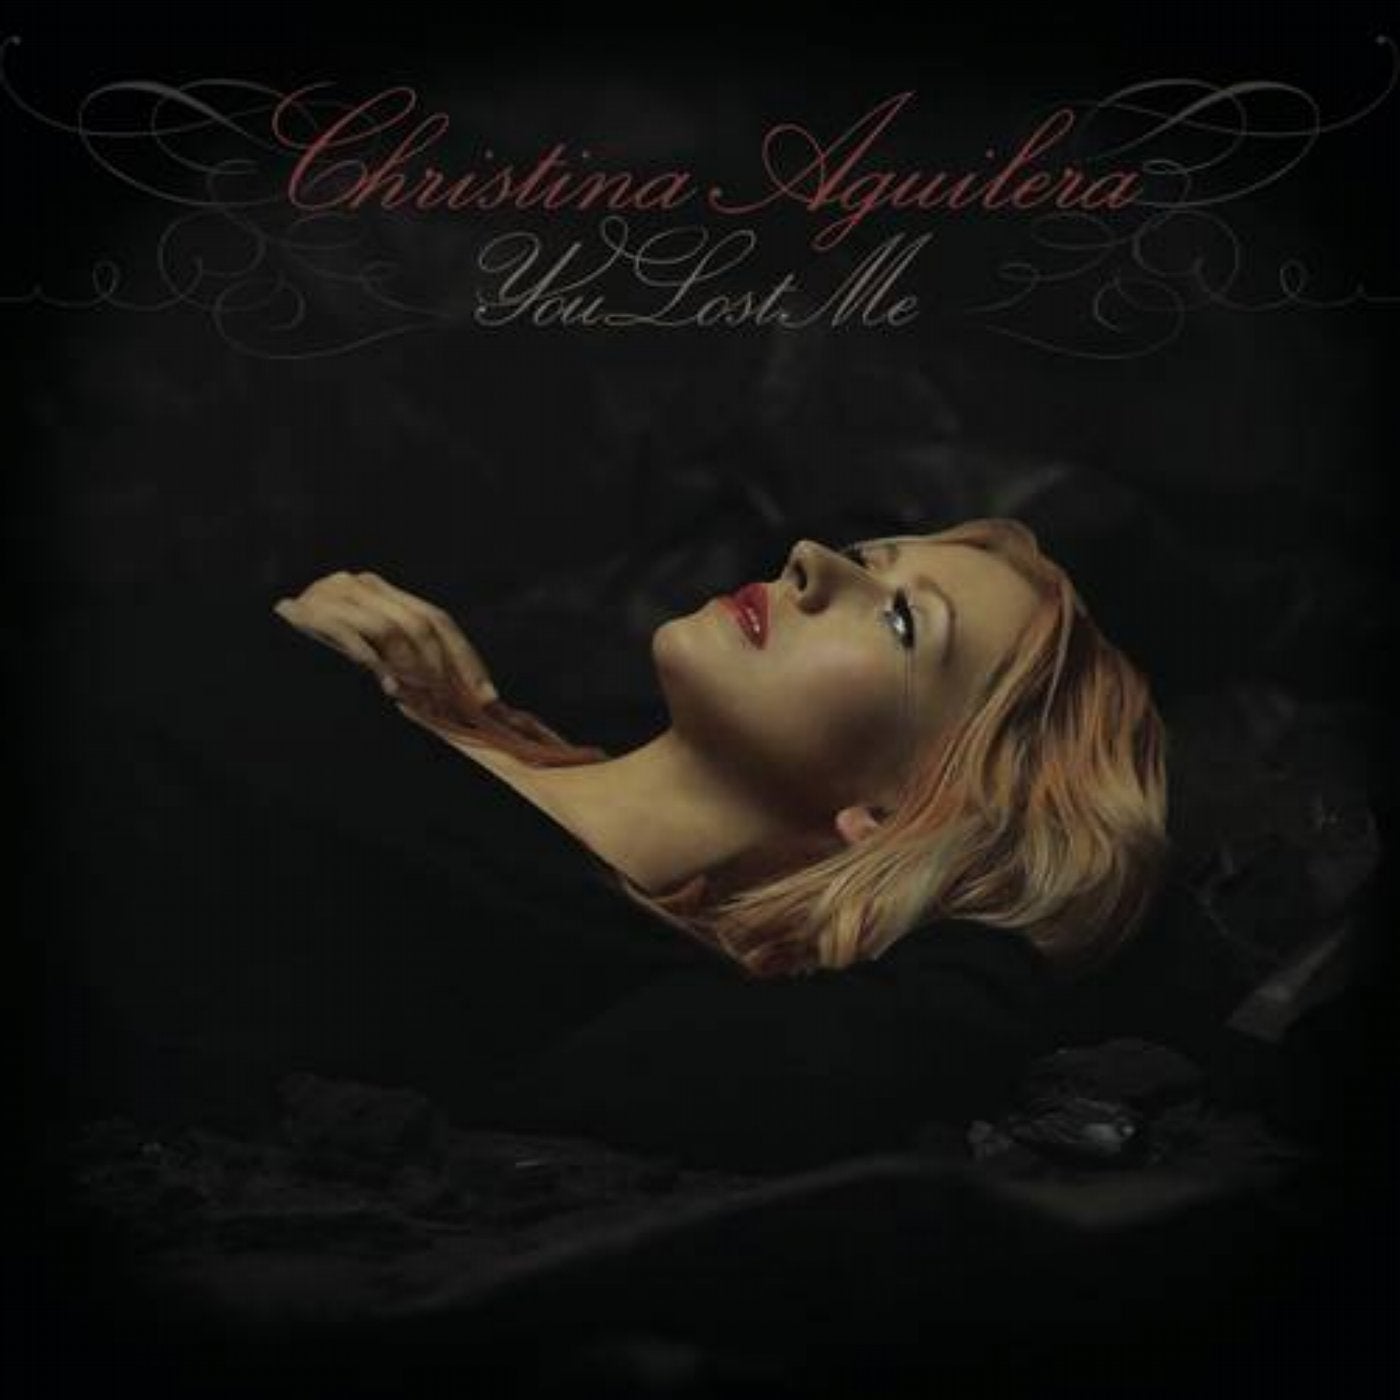 straight ahead refugees fireplace Christina Aguilera music download - Beatport